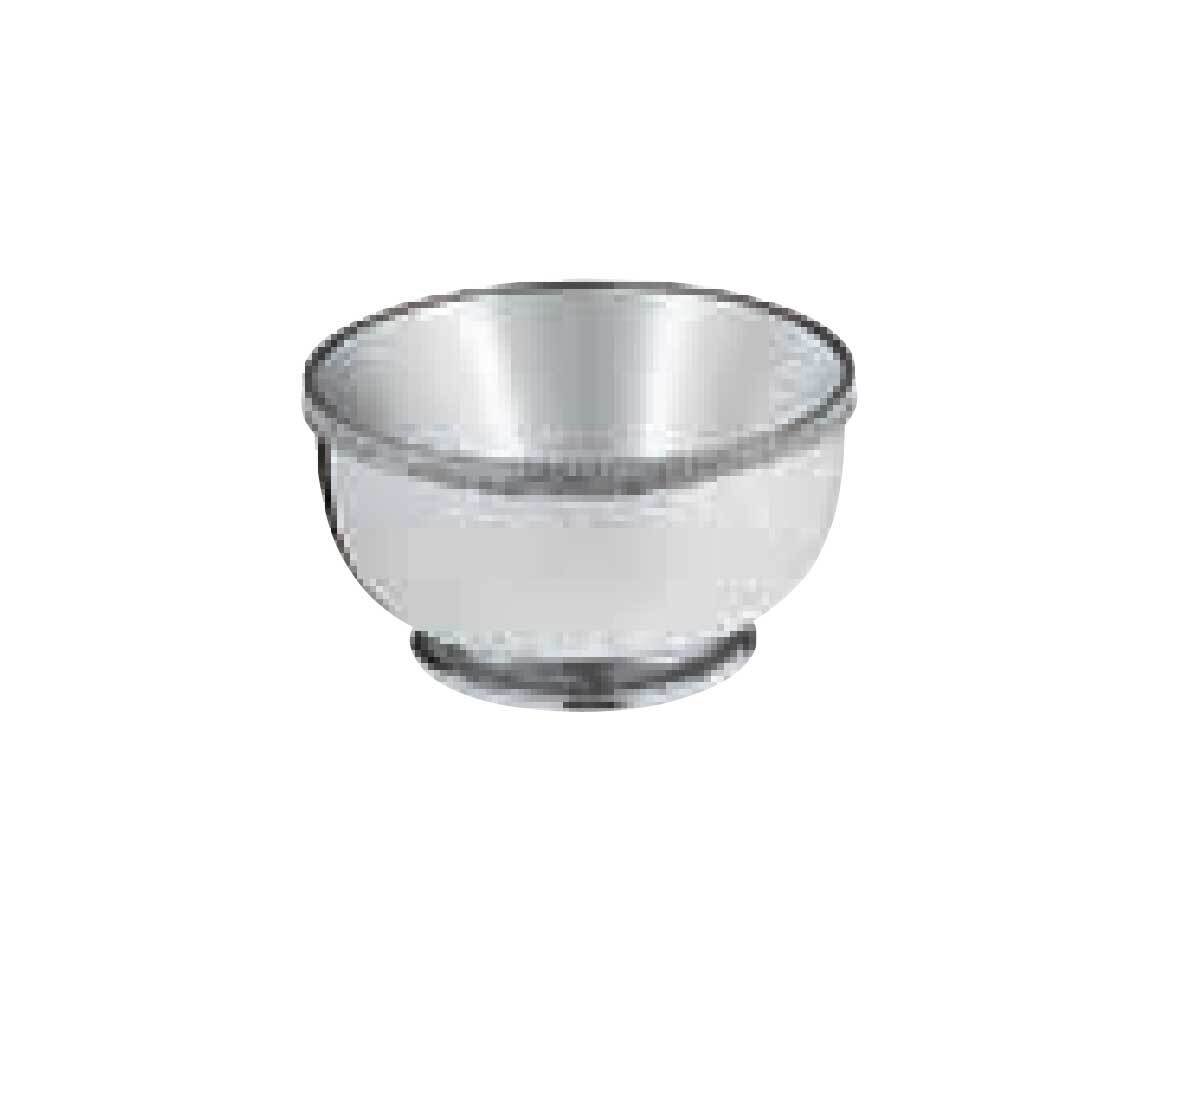 Ercuis Empire Small Cup 2.375 Inch Silver Plated F500280-11